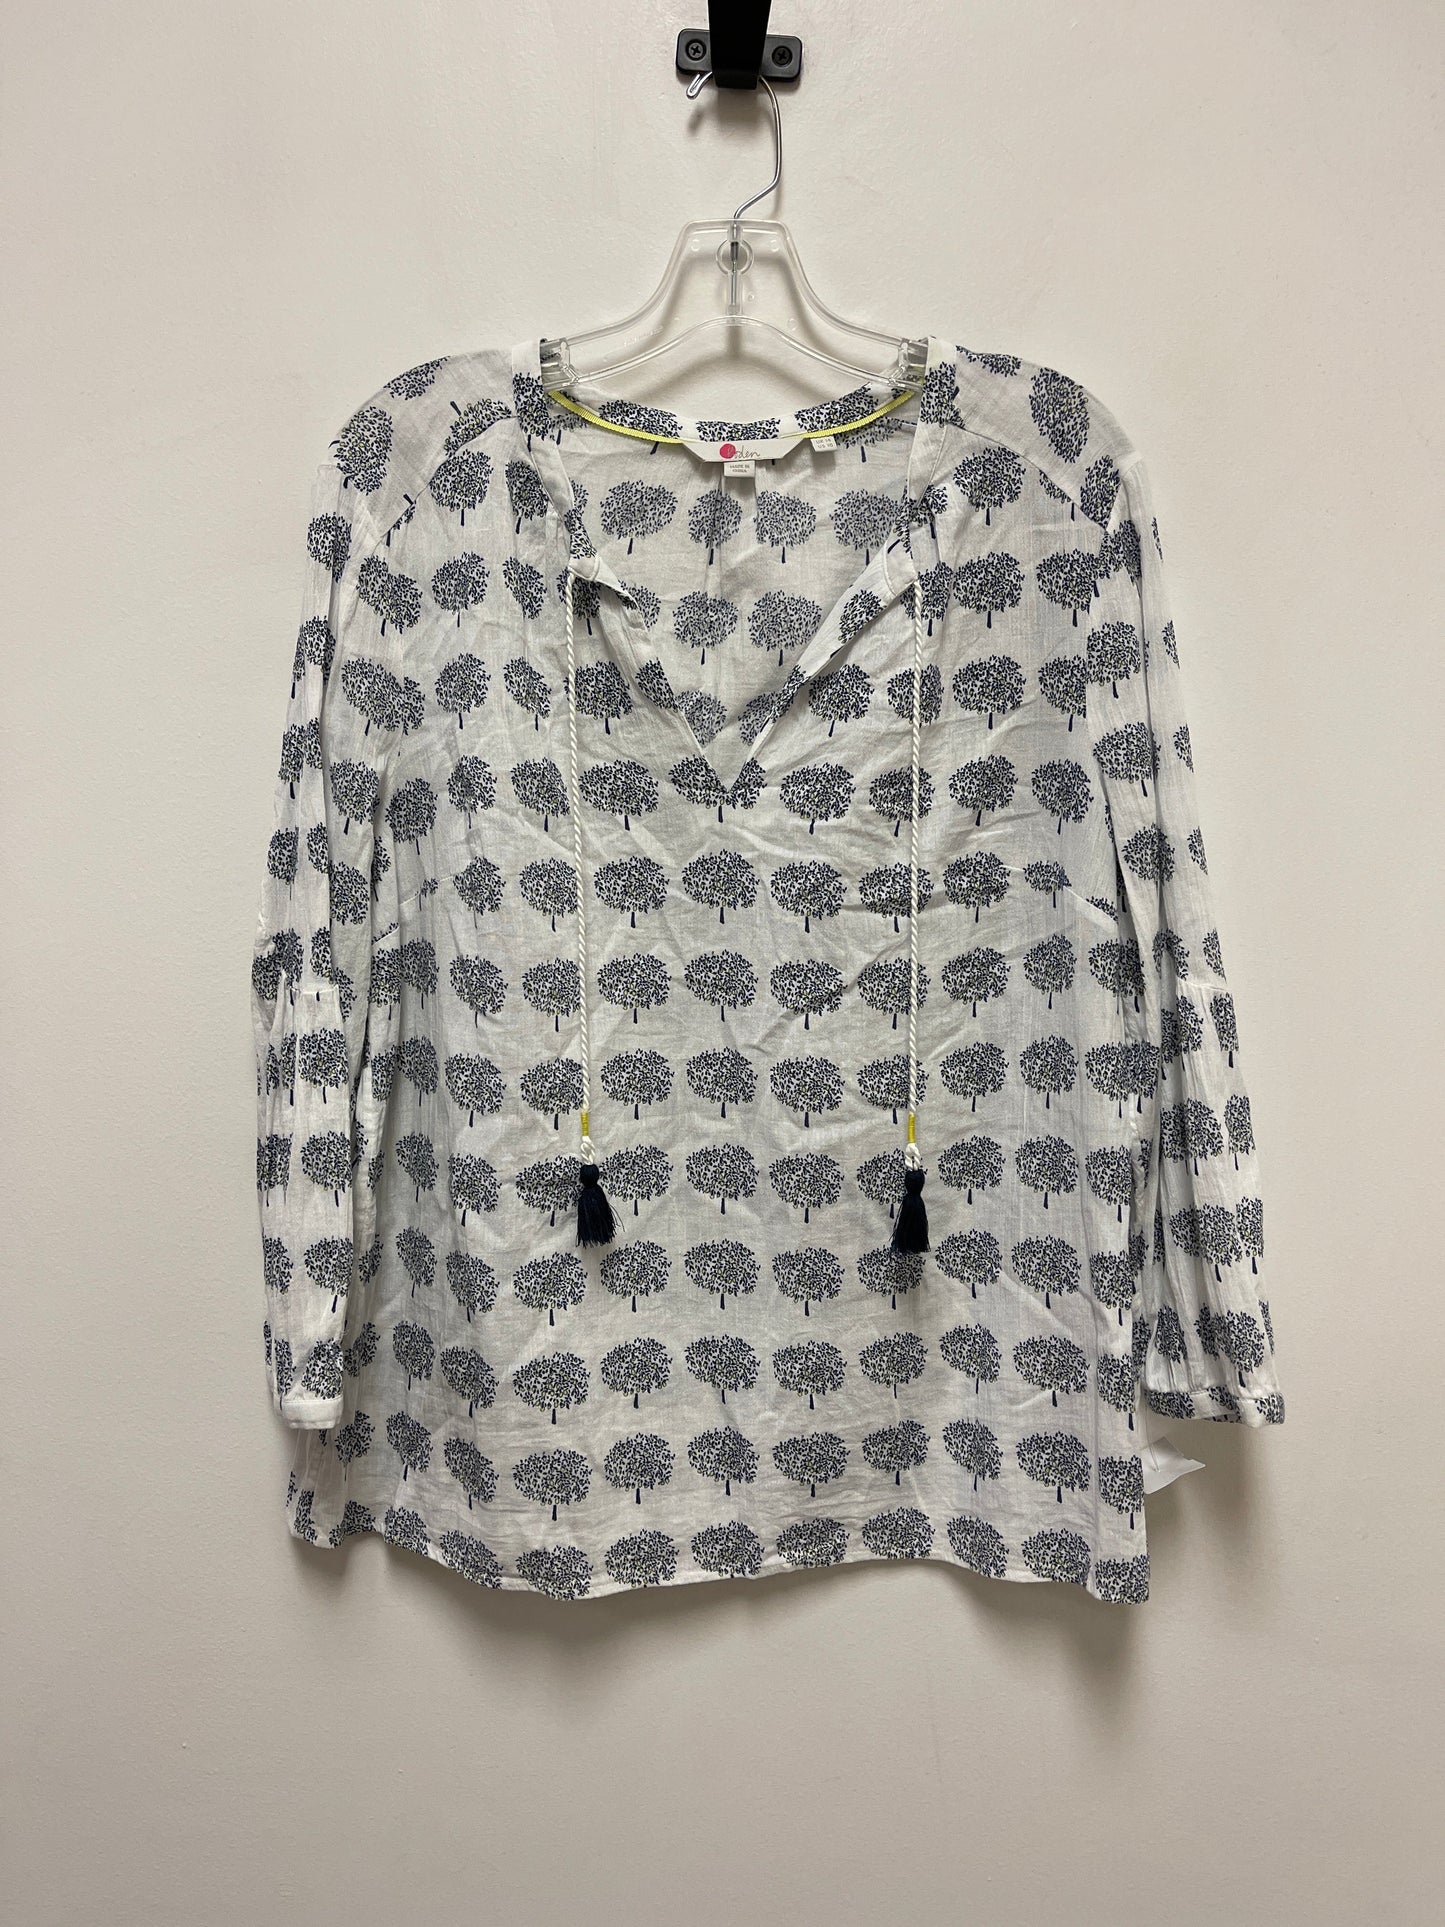 Navy Top Long Sleeve Boden, Size M